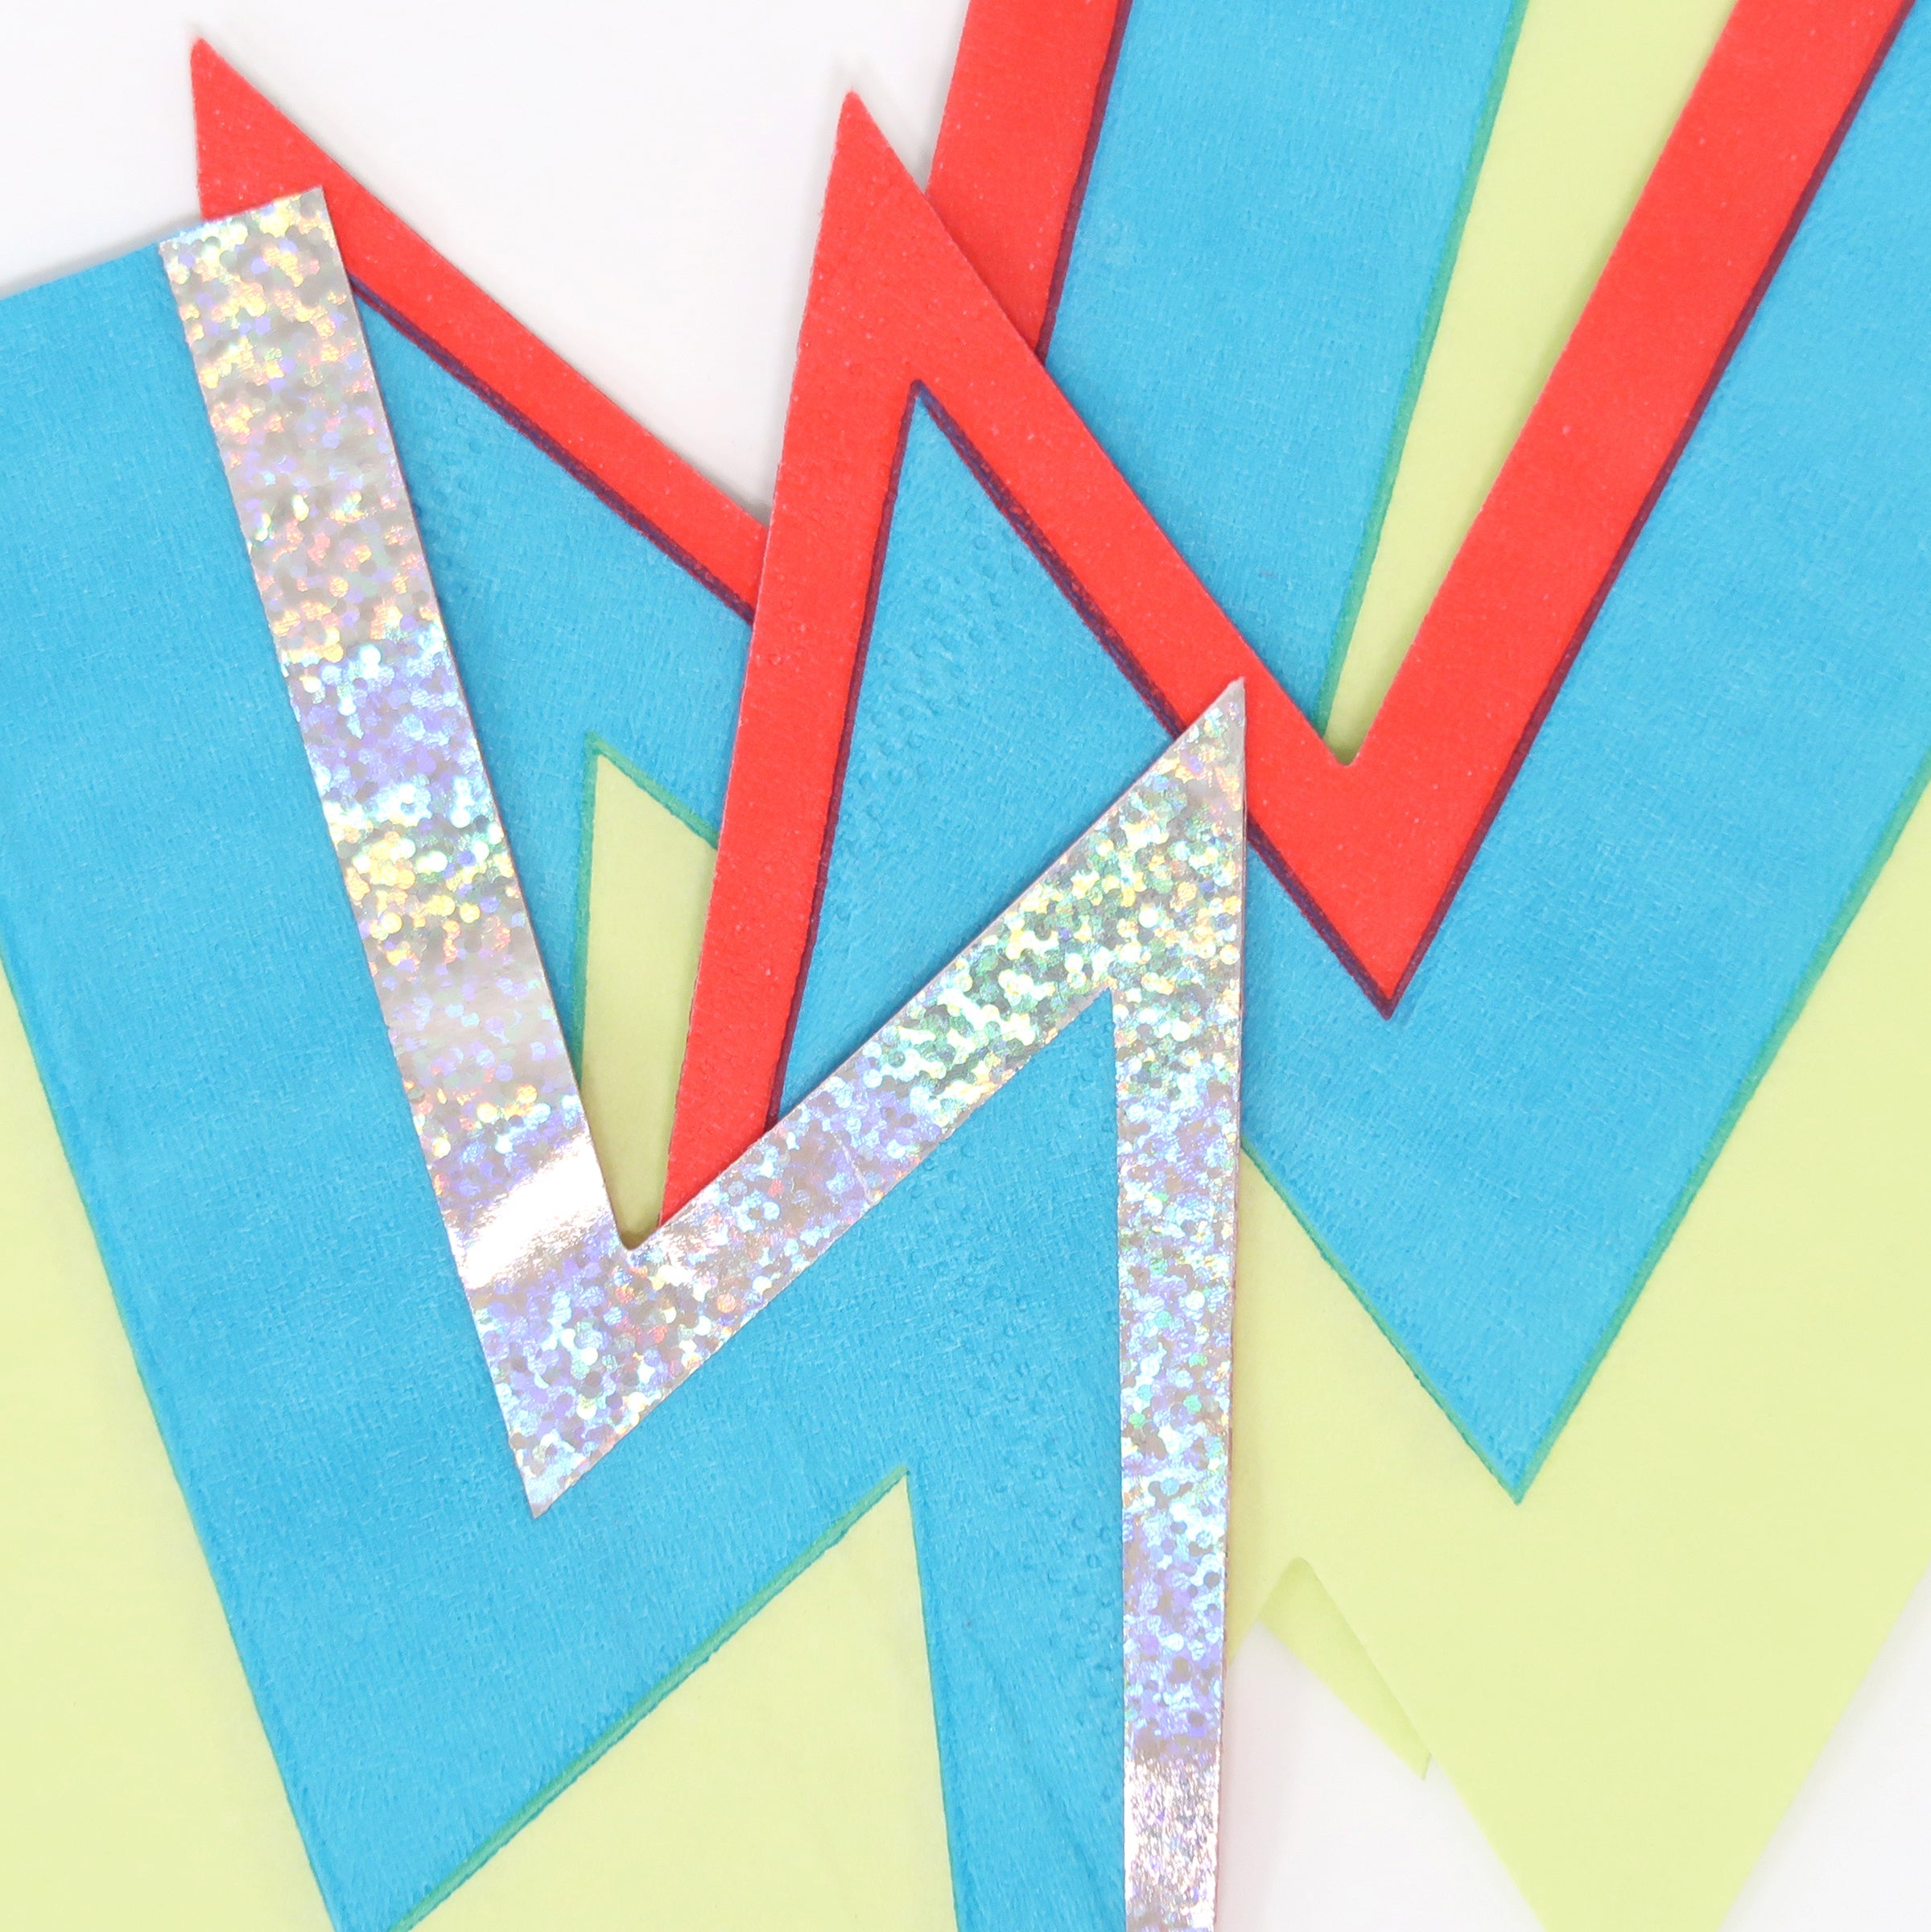 If you're looking for superhero party supplies then you'll love our lightning bolt paper napkins with holographic silver foil details.